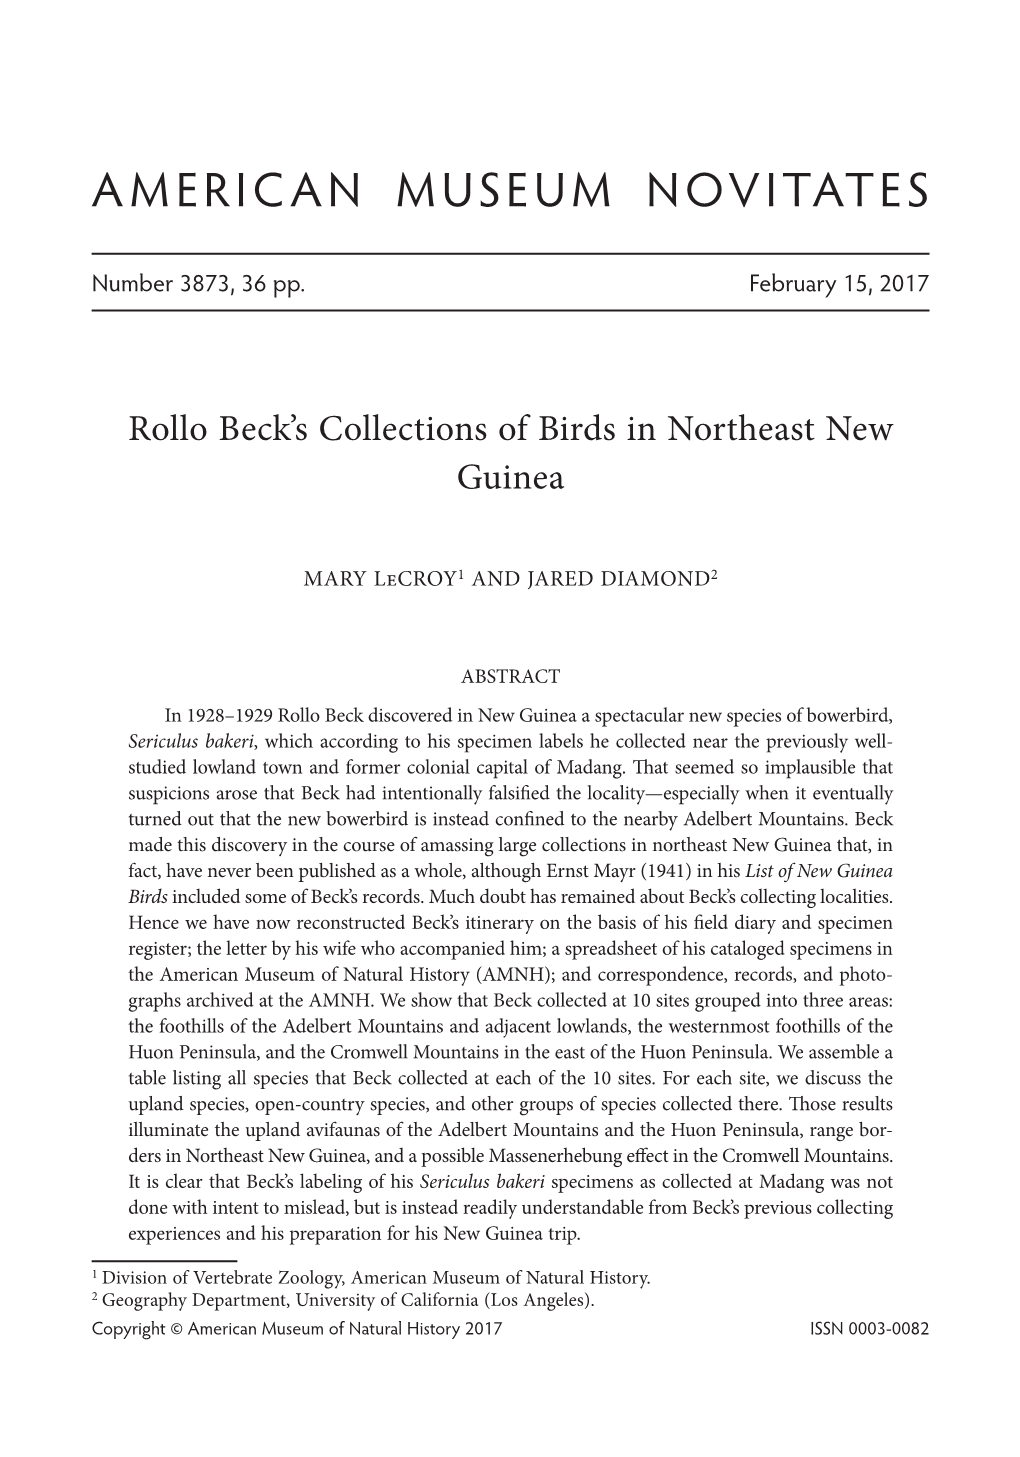 Rollo Beck's Collections of Birds in Northeast New Guinea